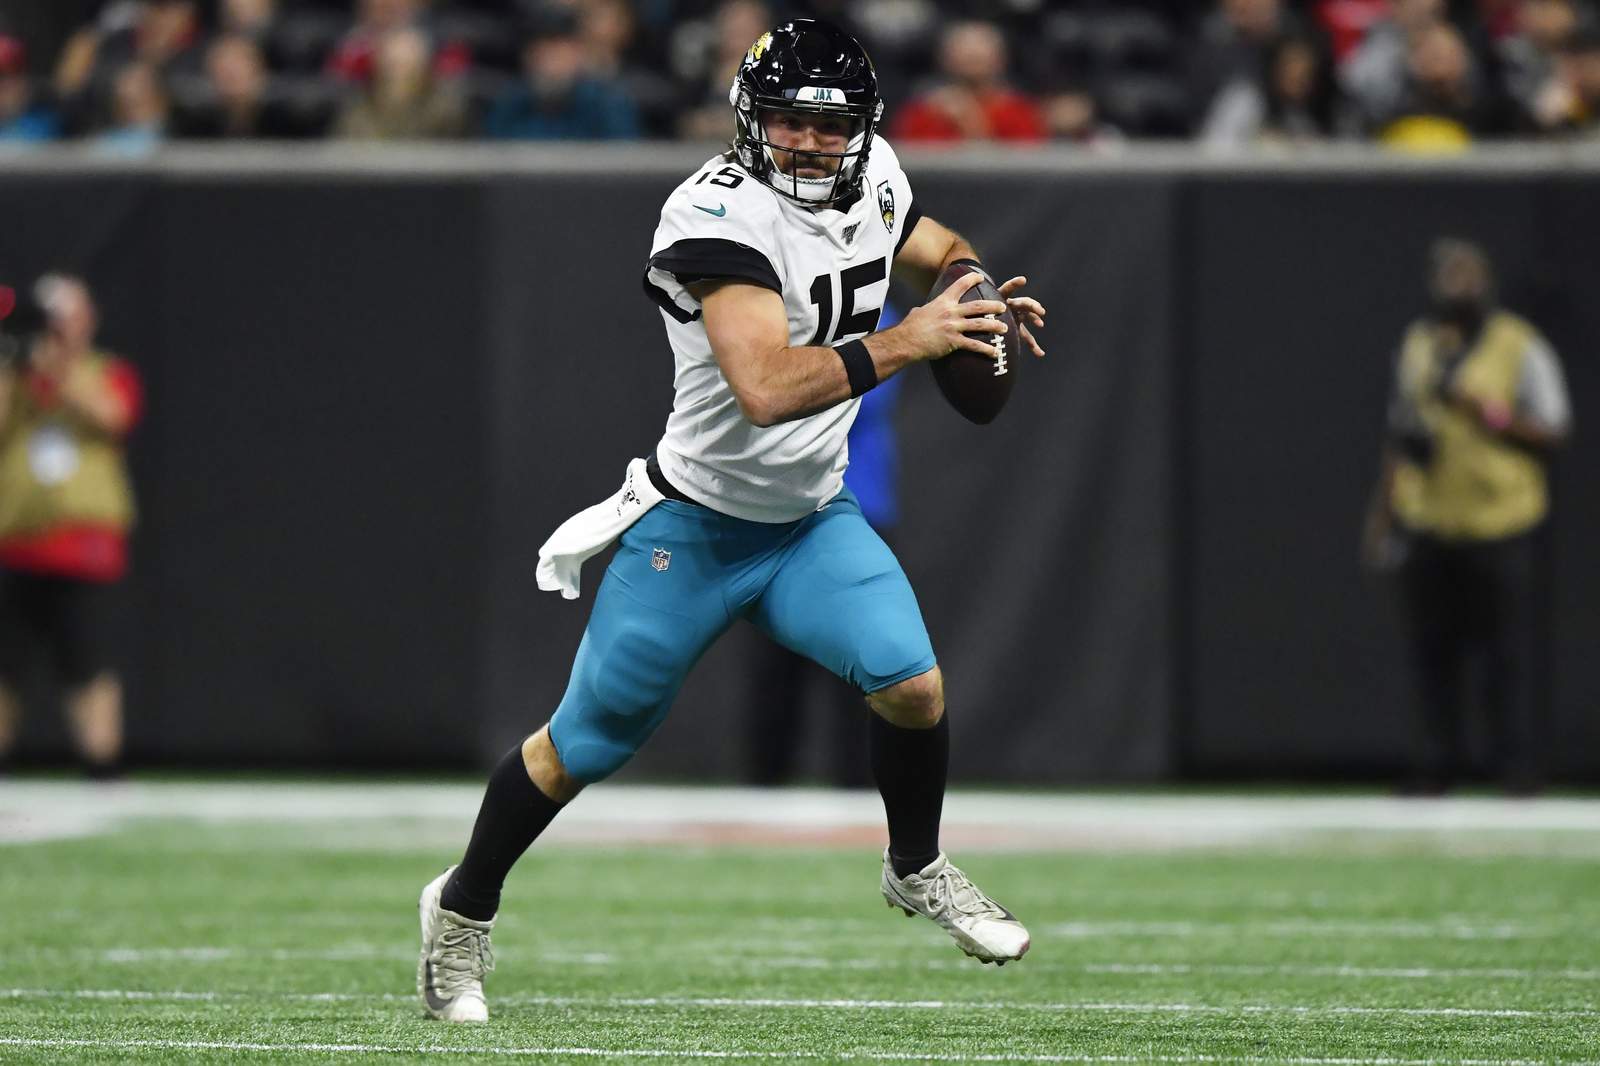 Mark Brunell: Minshew needs real football reps to take the next step